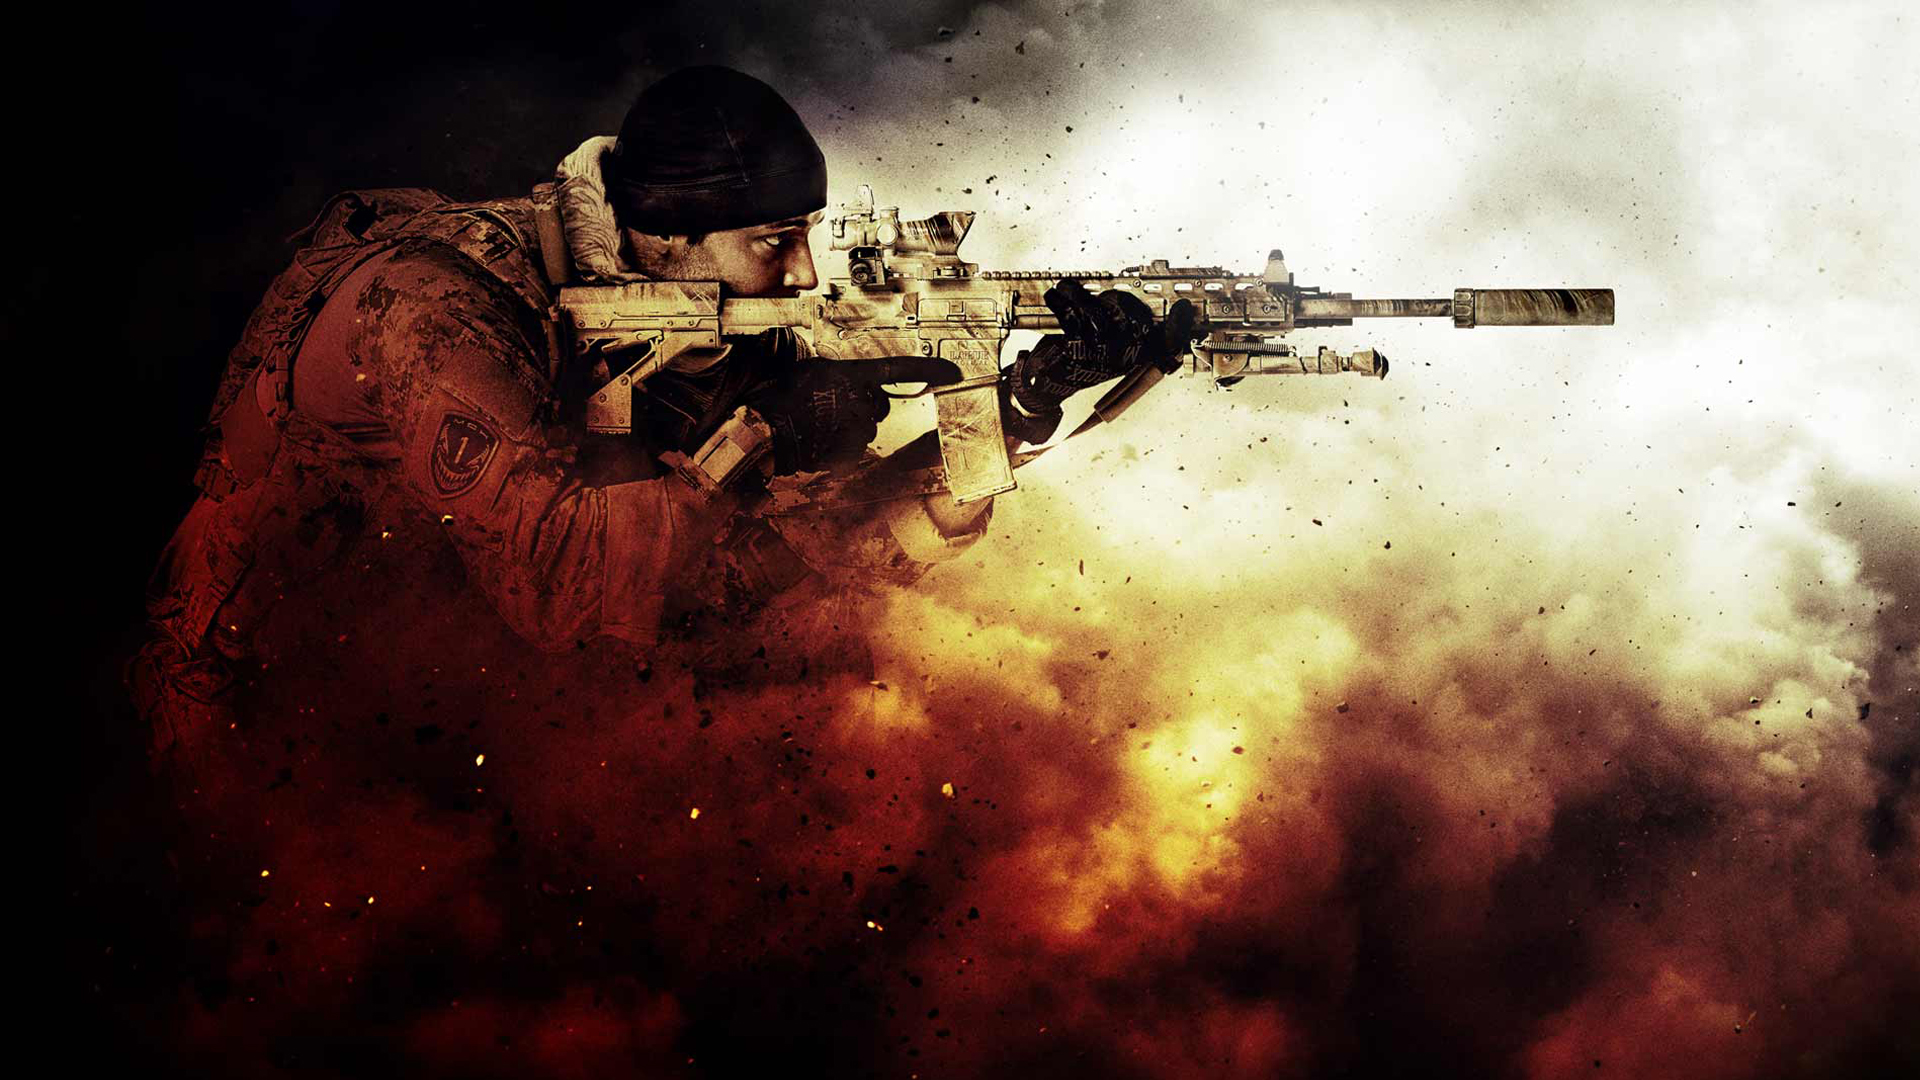 video game, medal of honor: warfighter, military, soldier, medal of honor 2160p